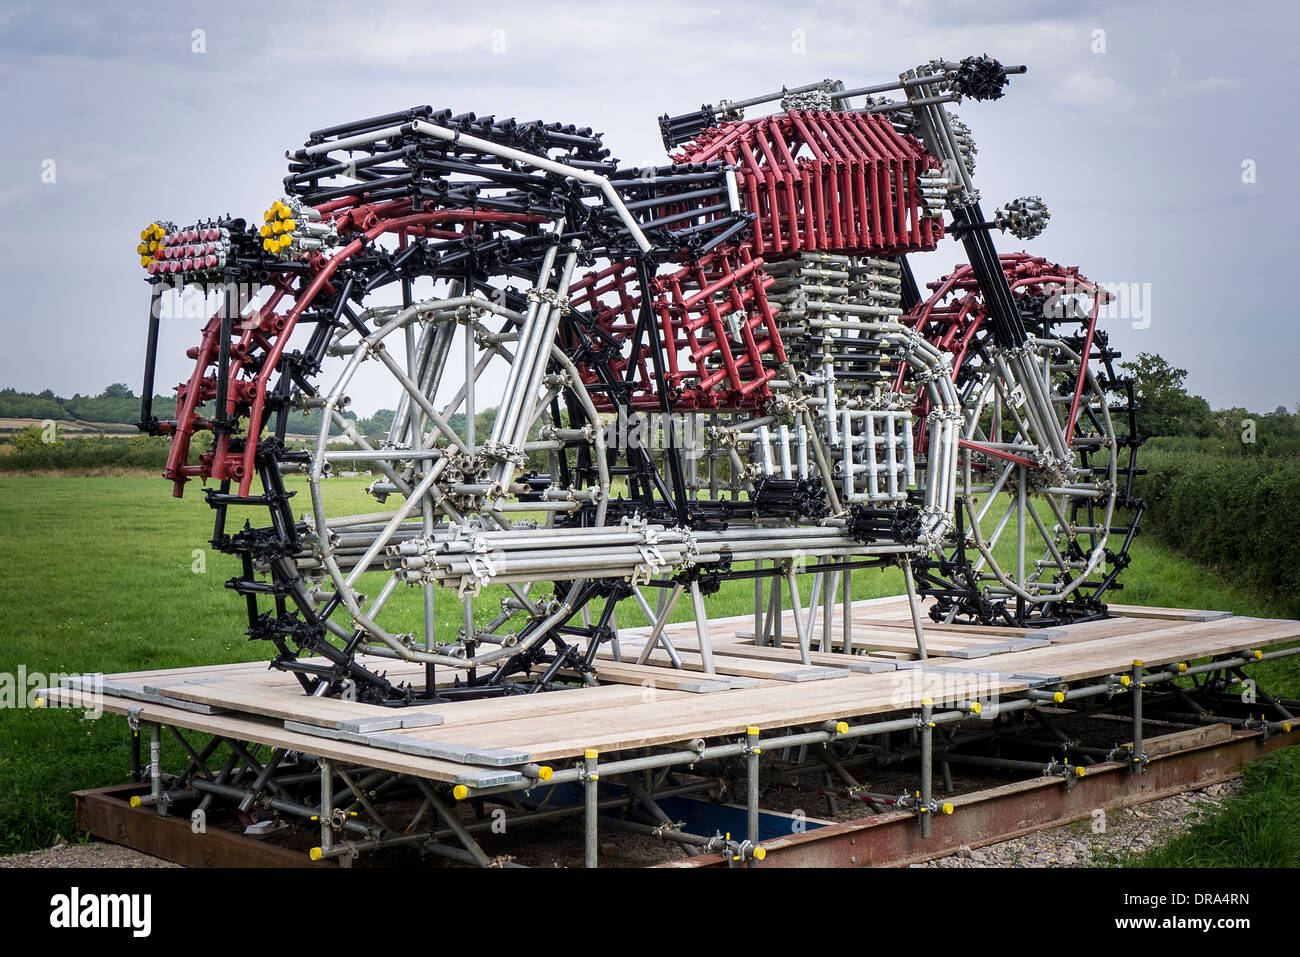 Motorcycle constructed from metal tubes on display in a field in UK Stock Photo